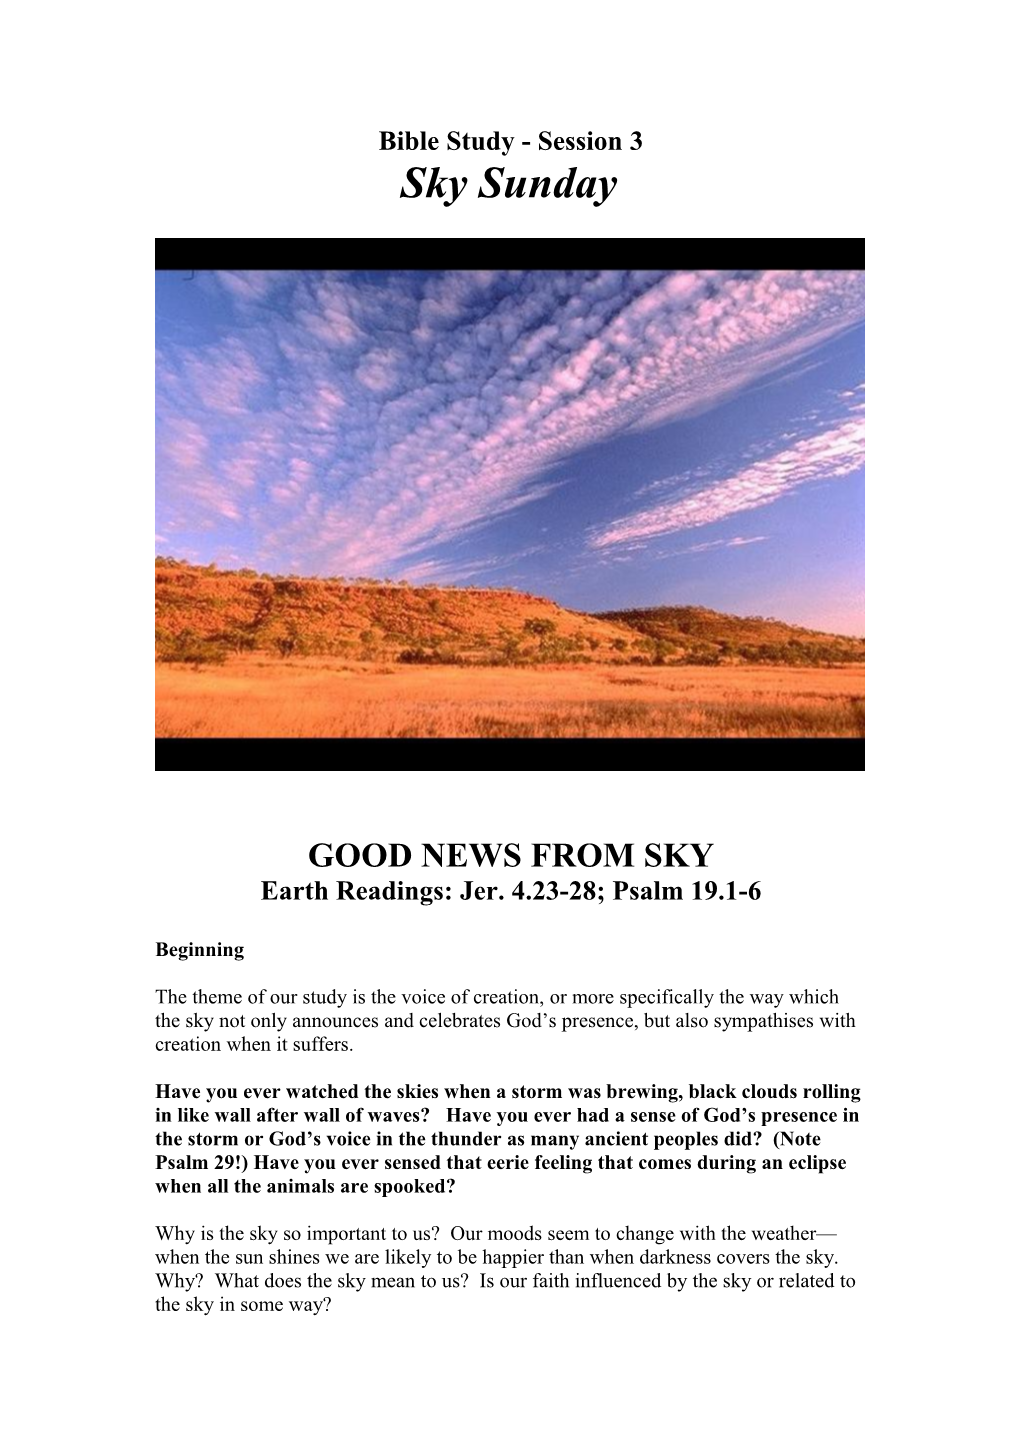 Good News from Sky